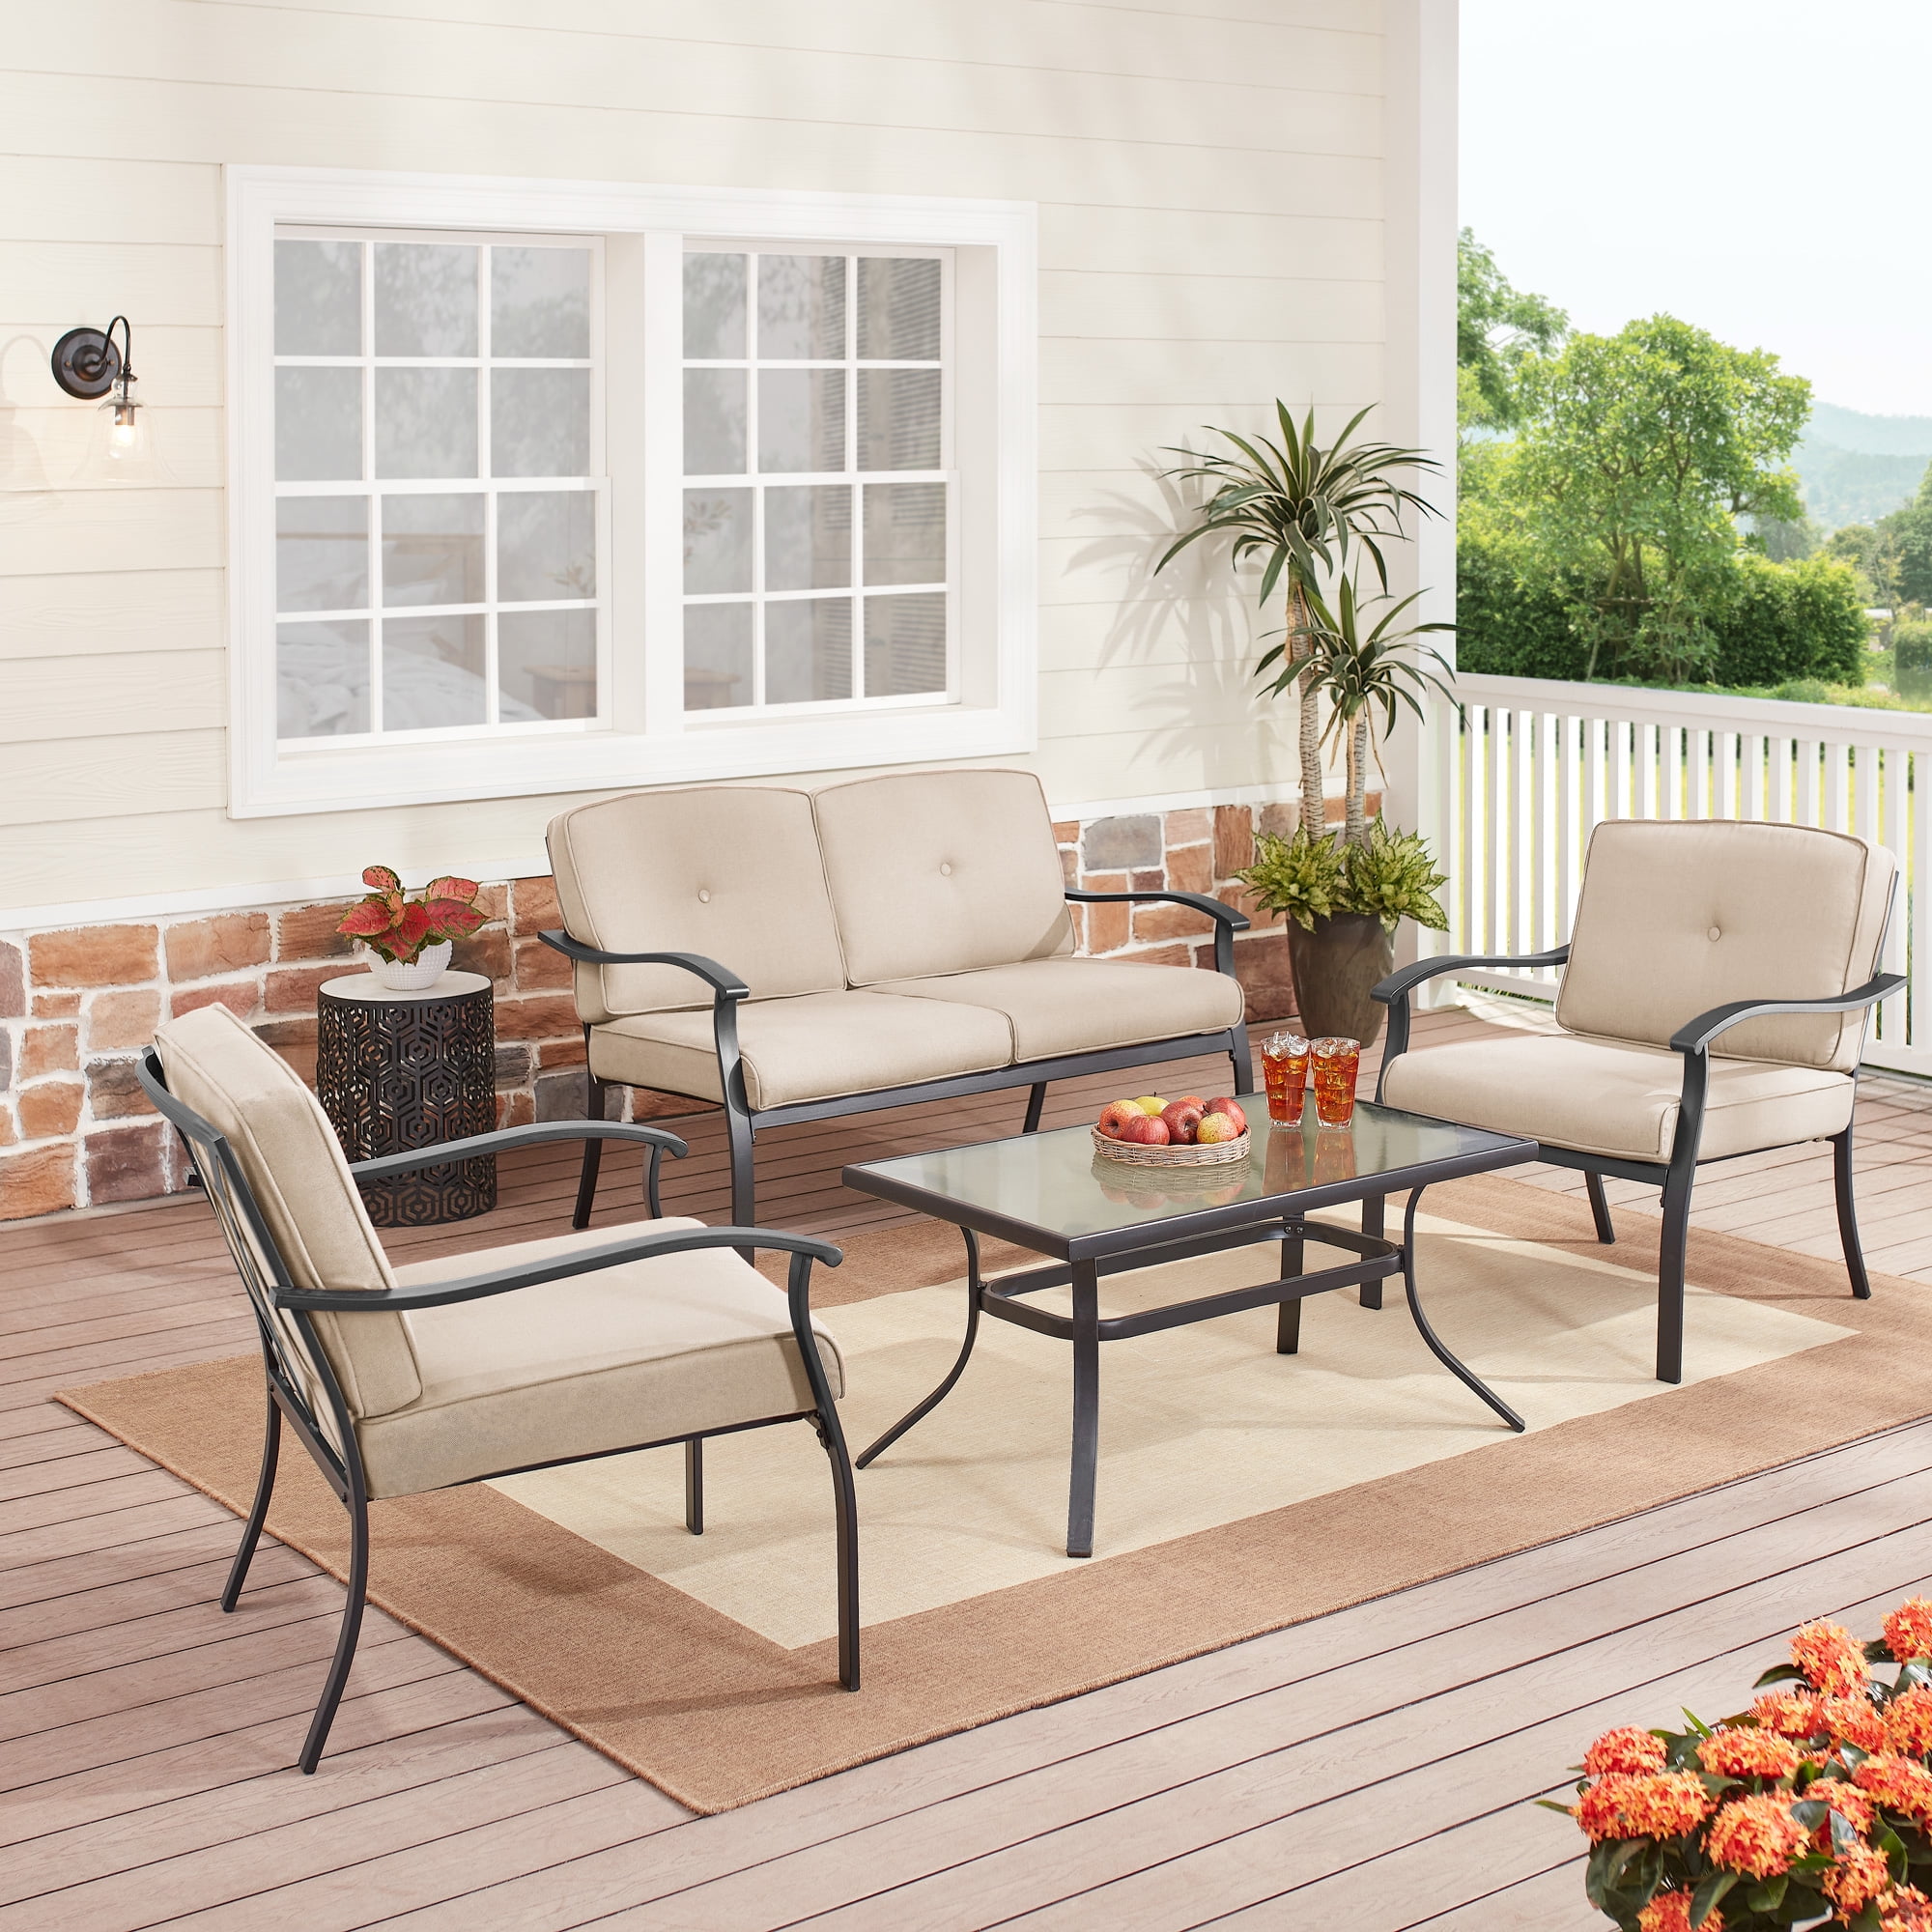 PatioFestival Patio Conversation Set Cushioned Outdoor Furniture Sets with All Weather Frame 4Pcs, Beige 